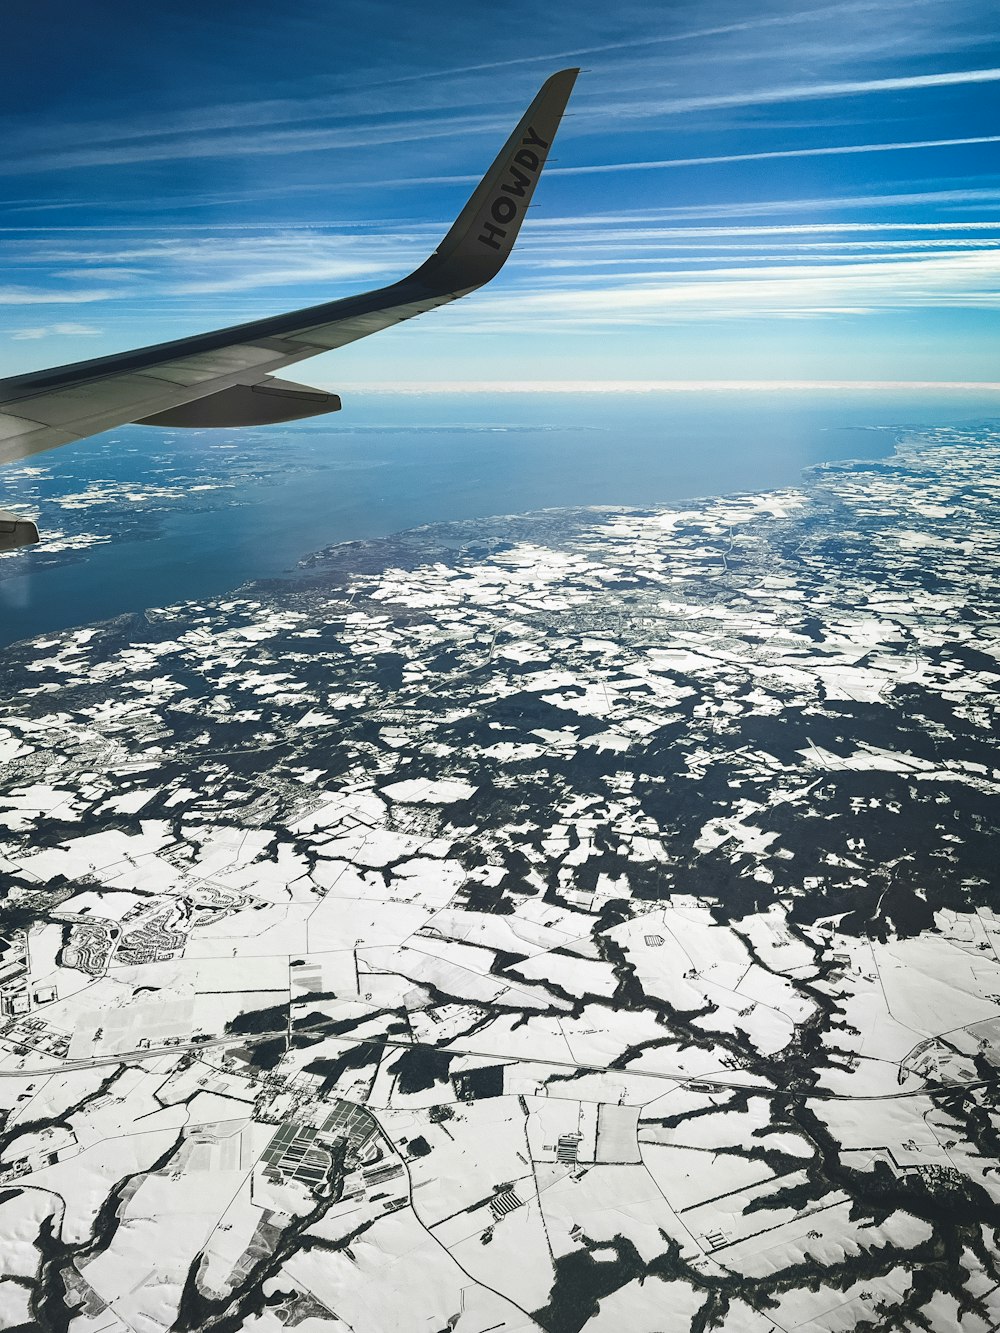 a view of the wing of an airplane flying over a frozen lake